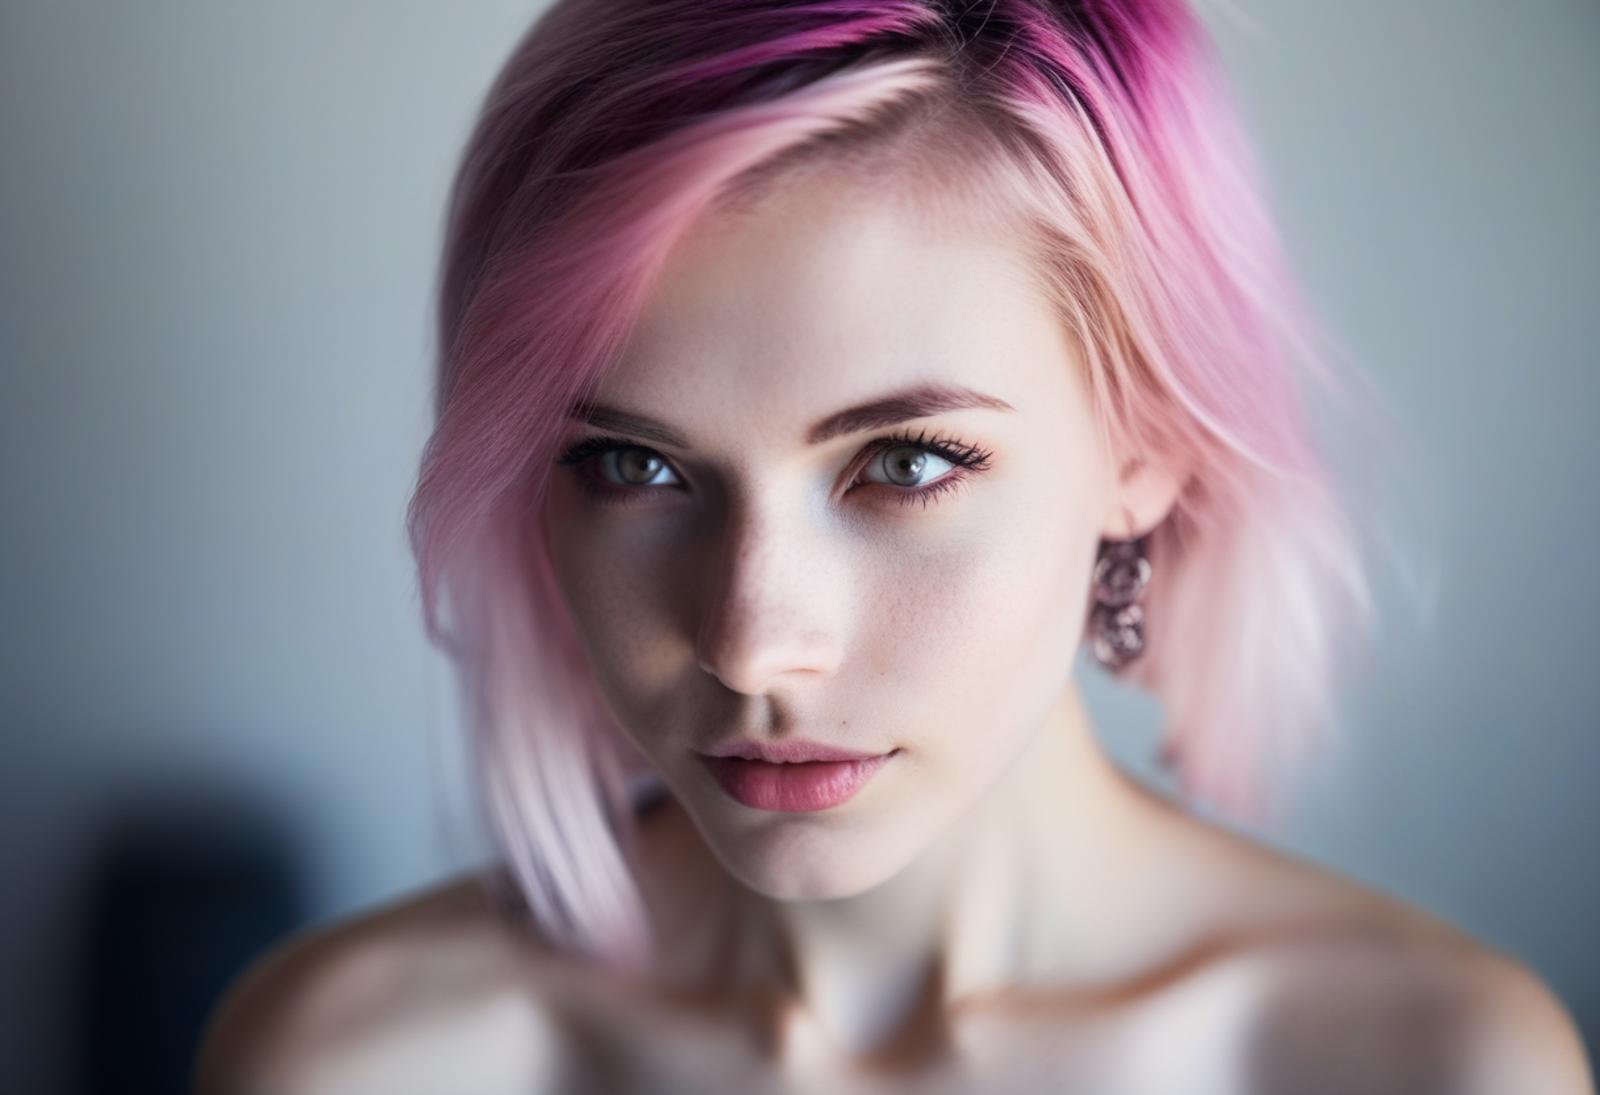 A young woman with pink hair and green eyes wearing earrings.